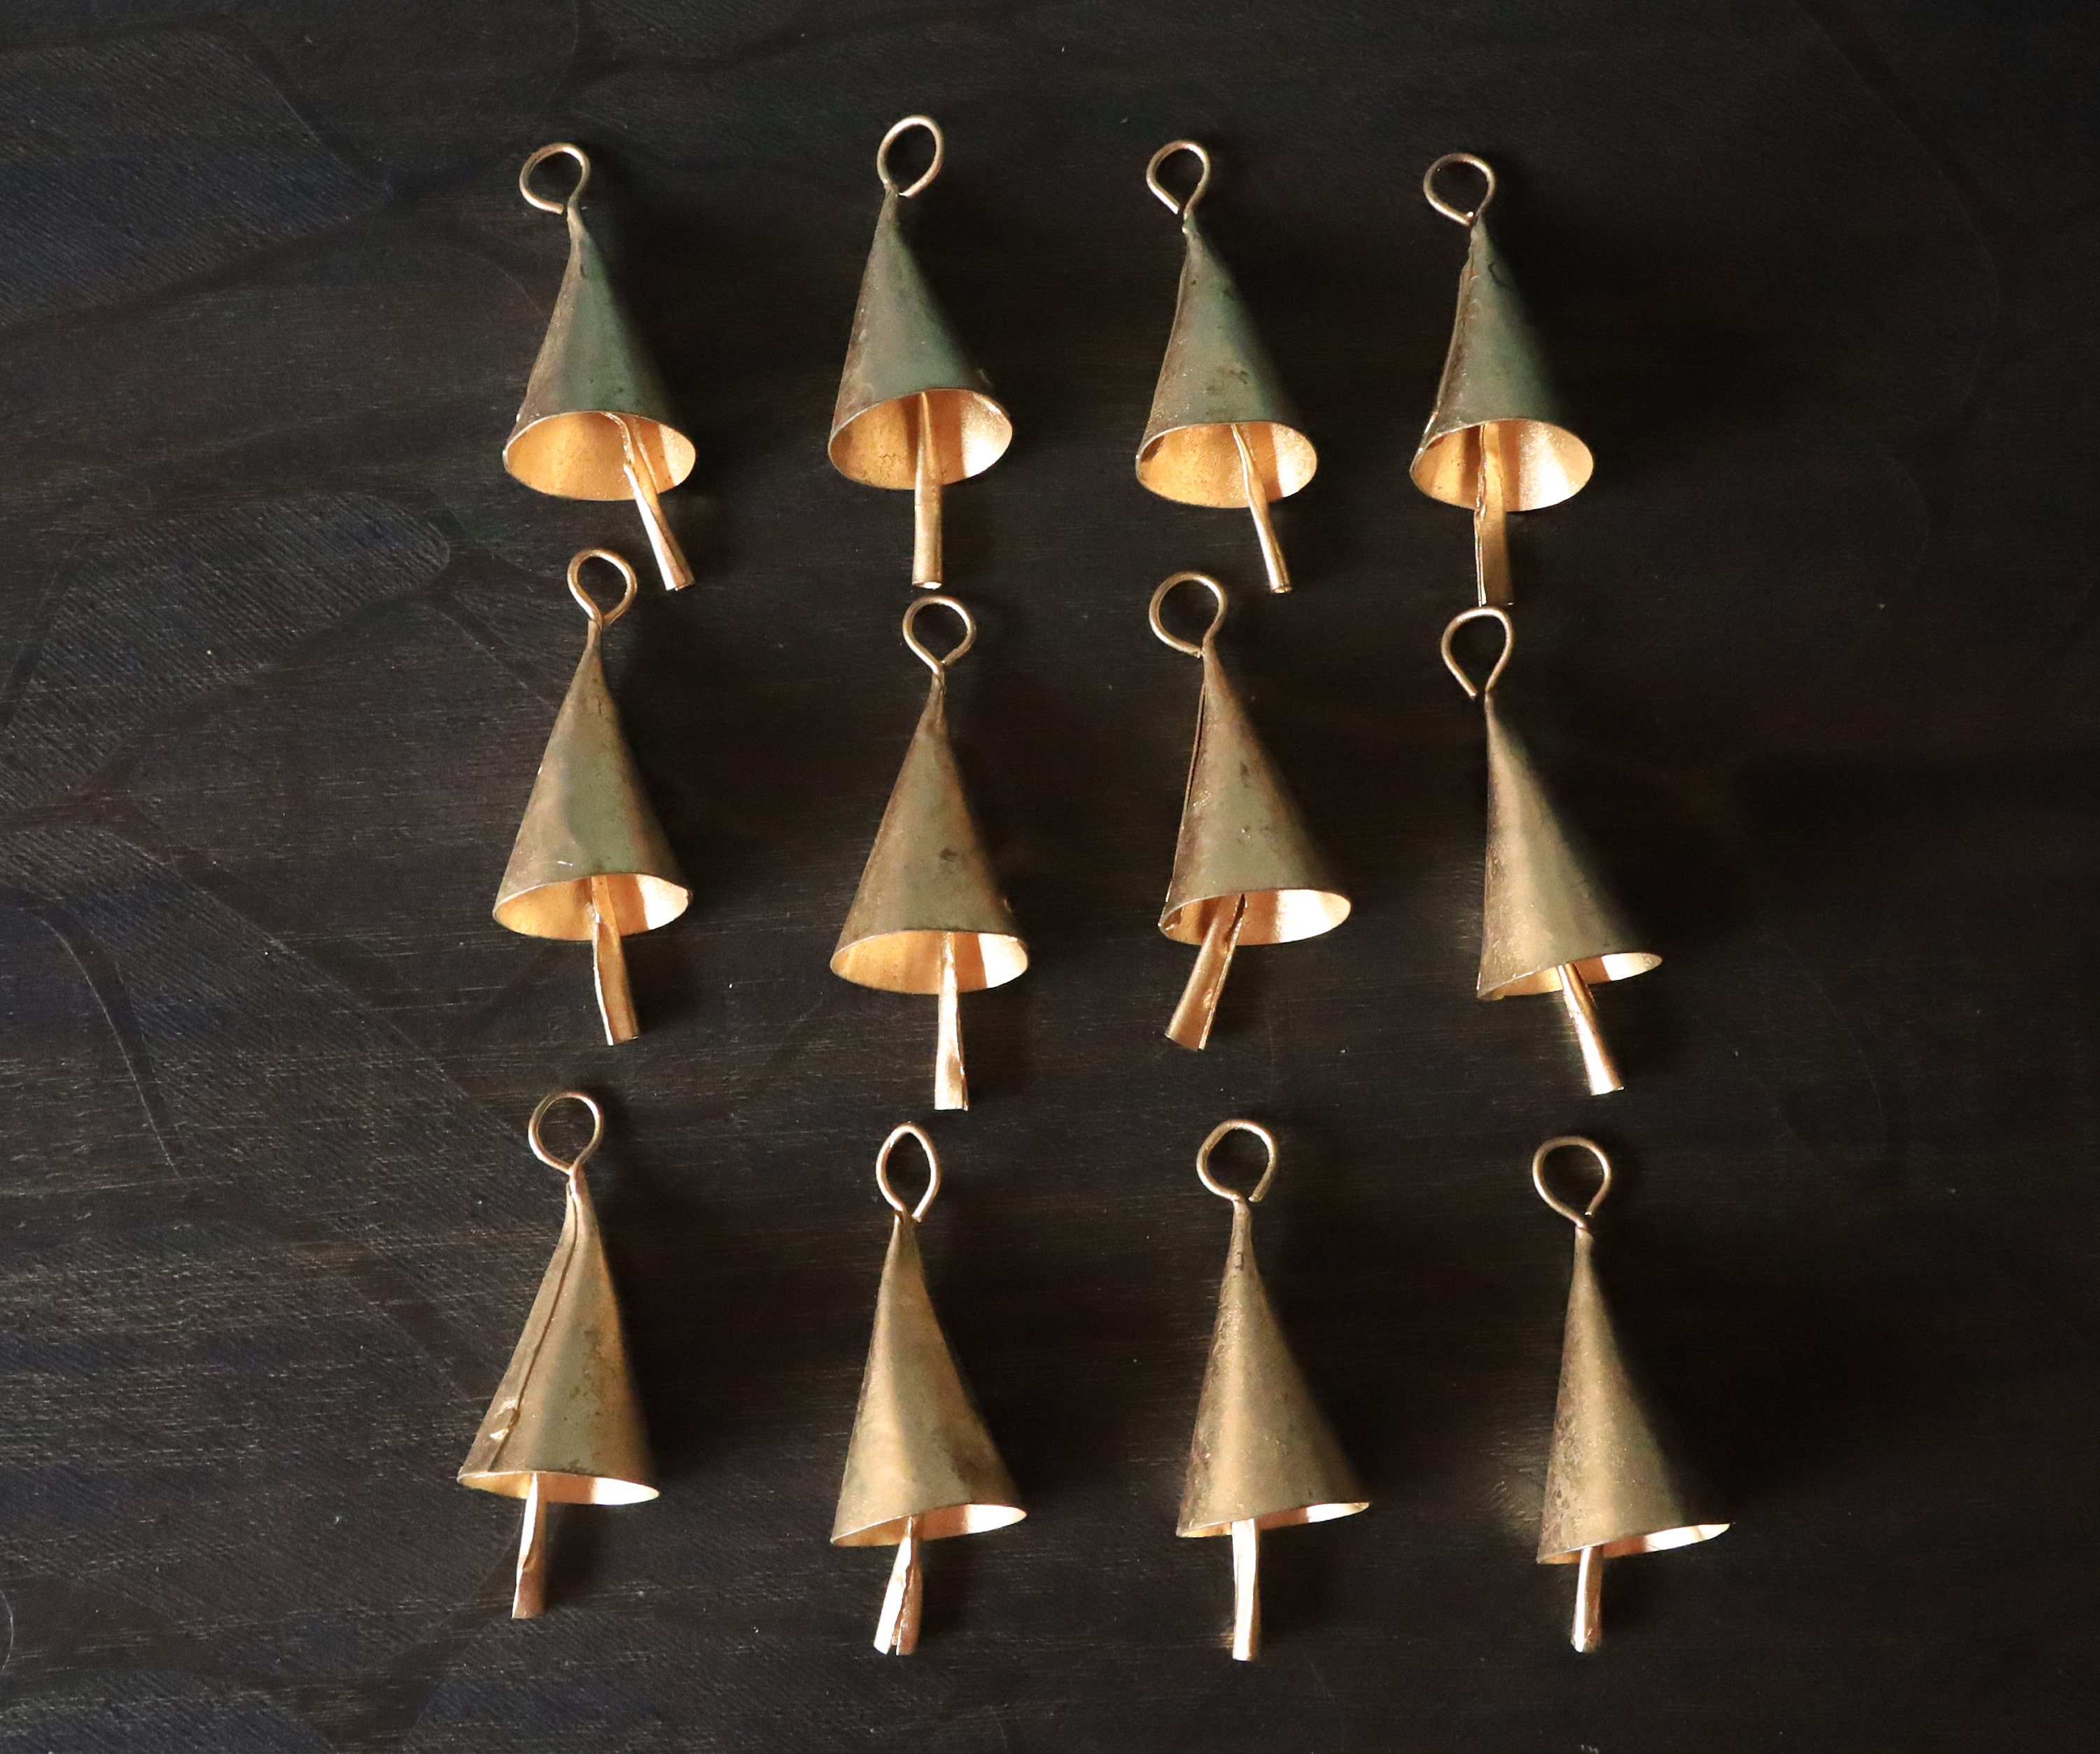 HobbyHerz 100 pieces small bells for crafting, mini bells/bells made of  brass. : : Home & Kitchen